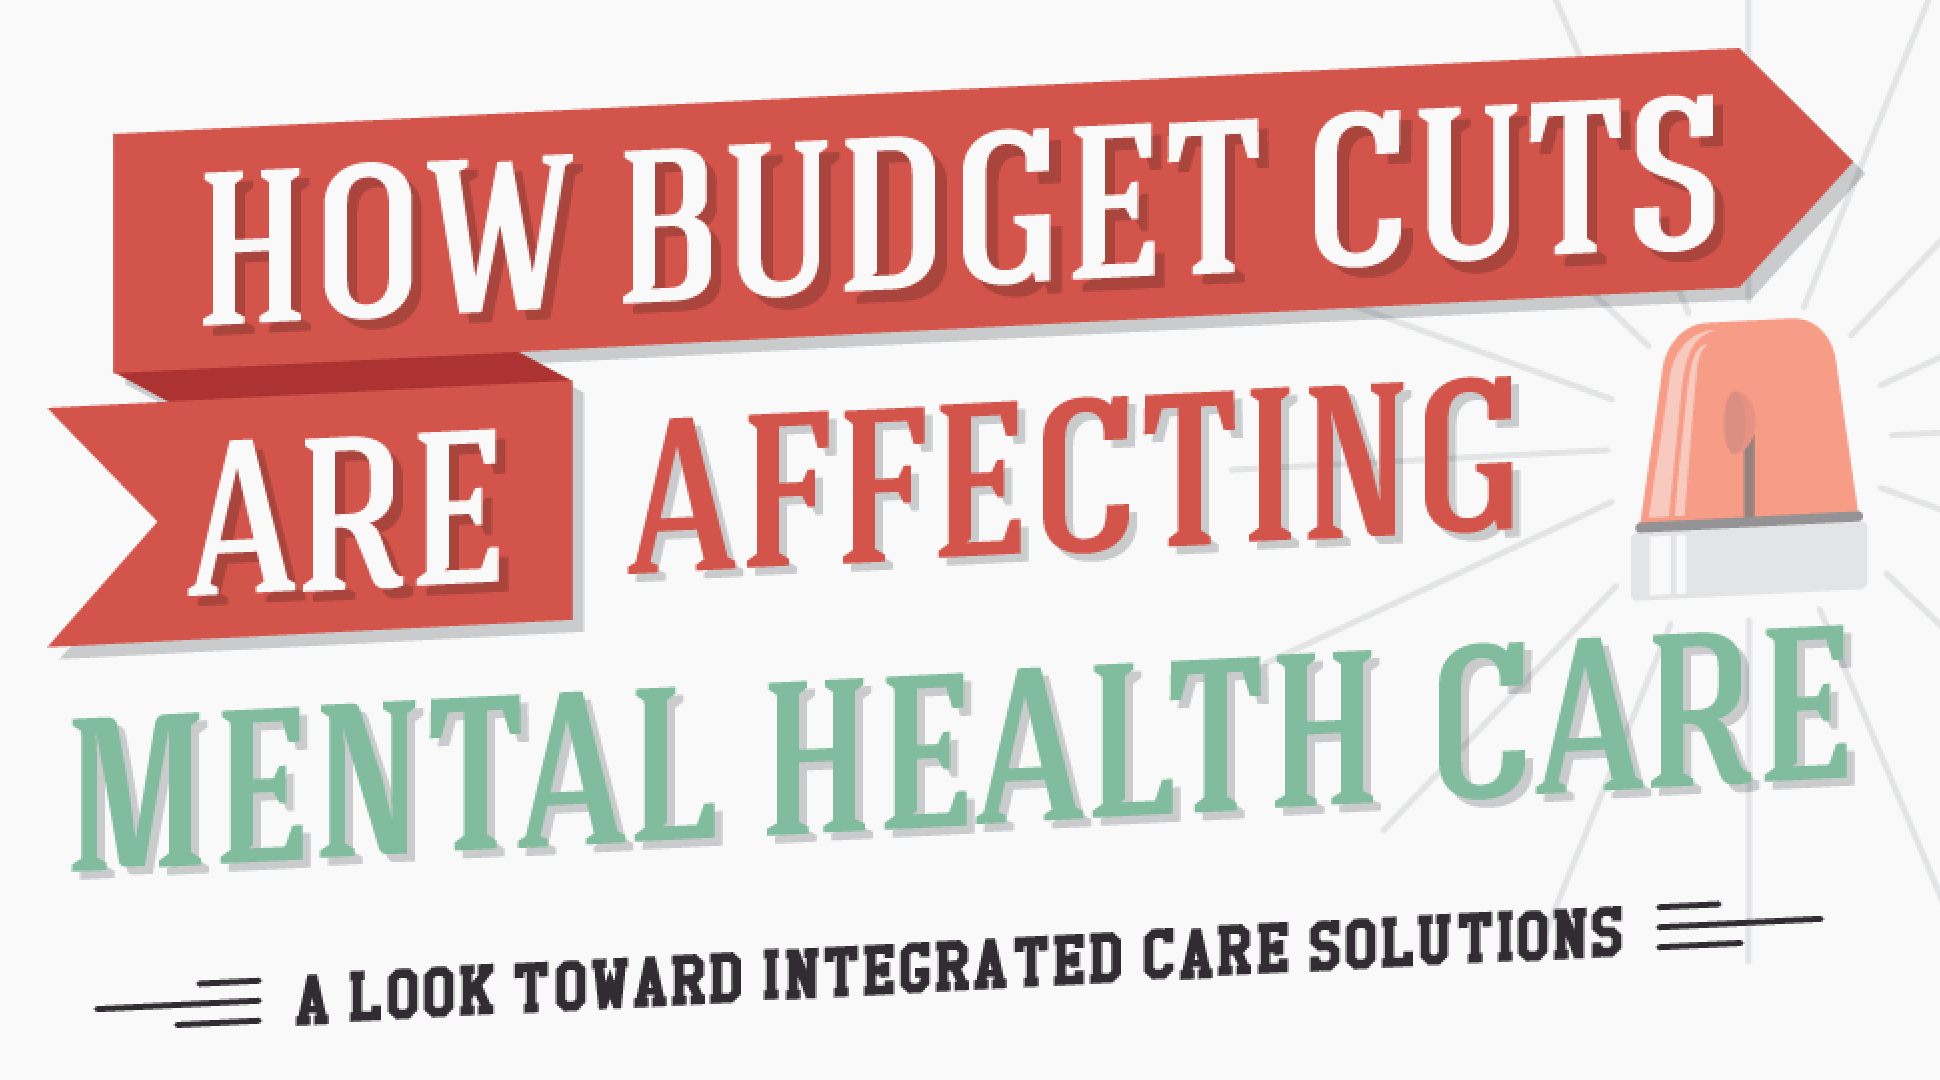 How Budget Cuts Are Affecting Mental Health Care